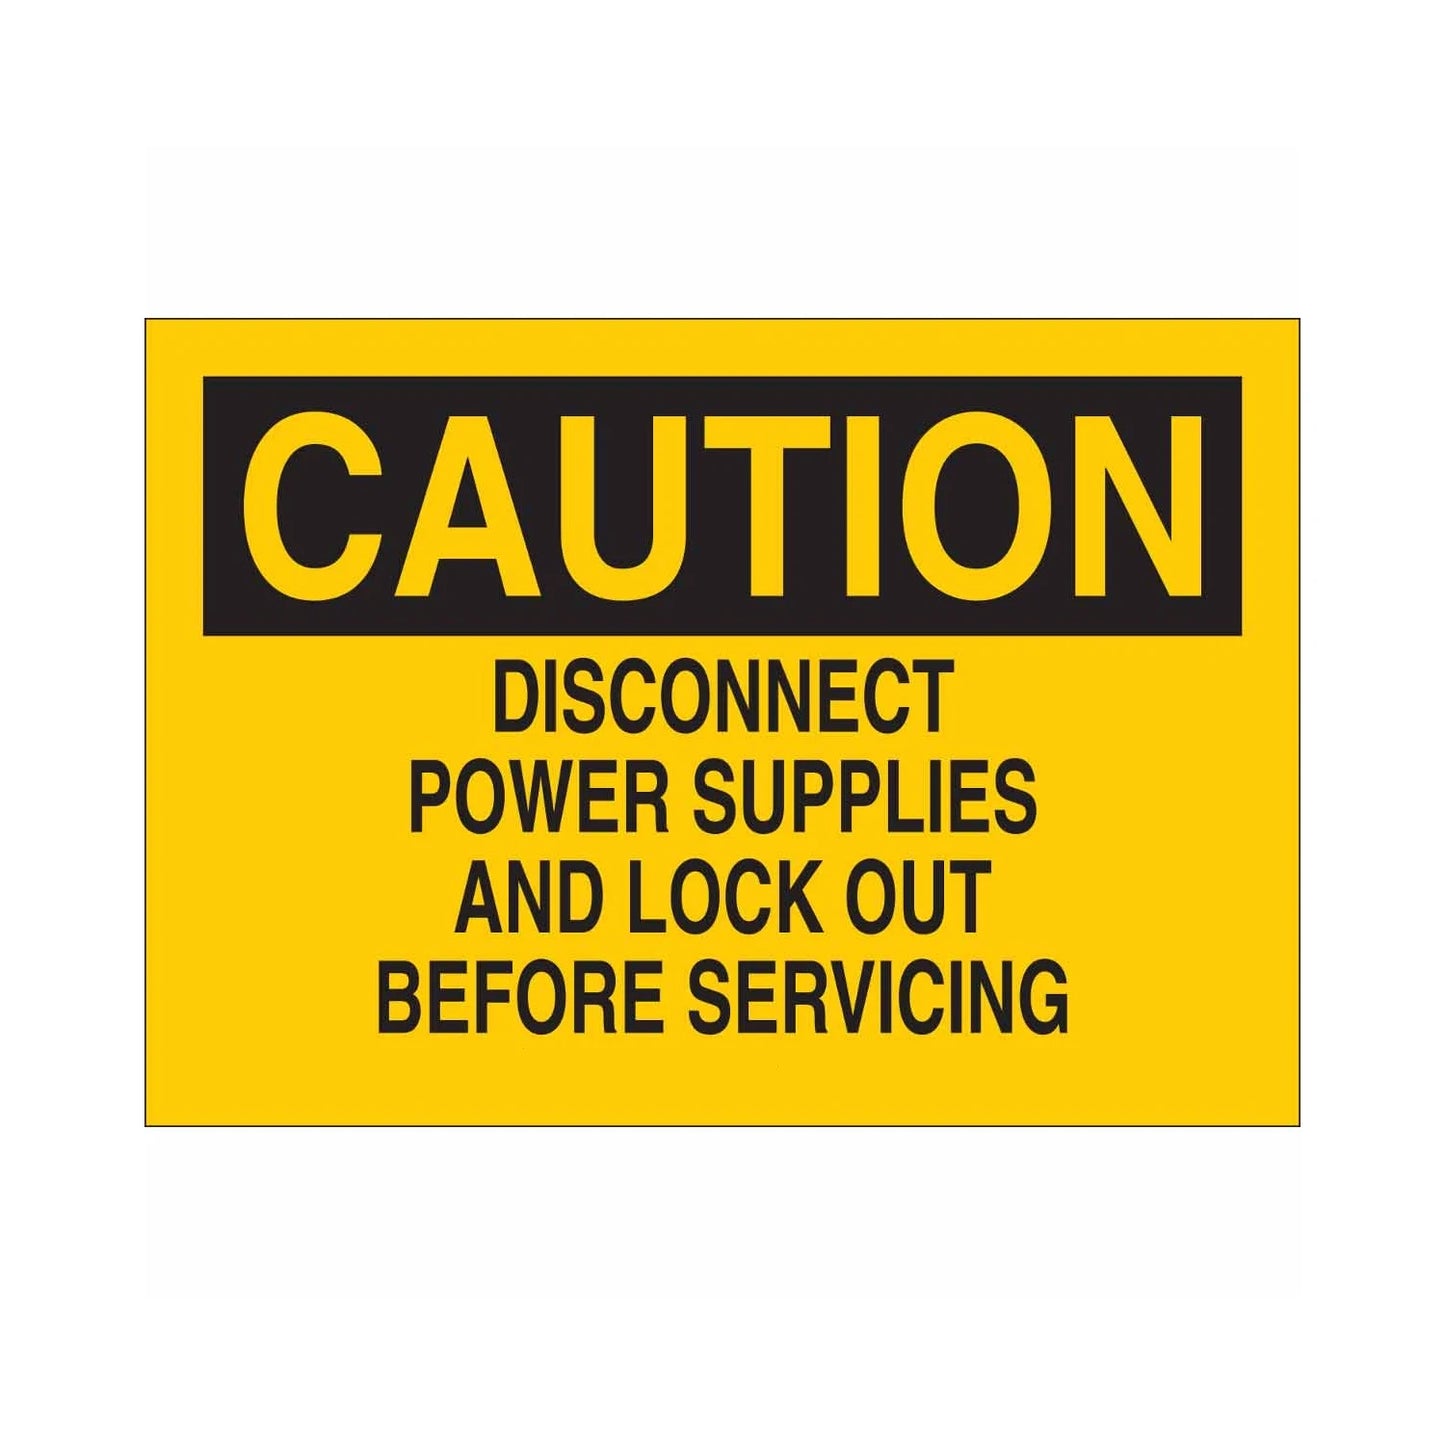 CAUTION Disconnect Power Supplies And Lock Out Before Servicing Sign